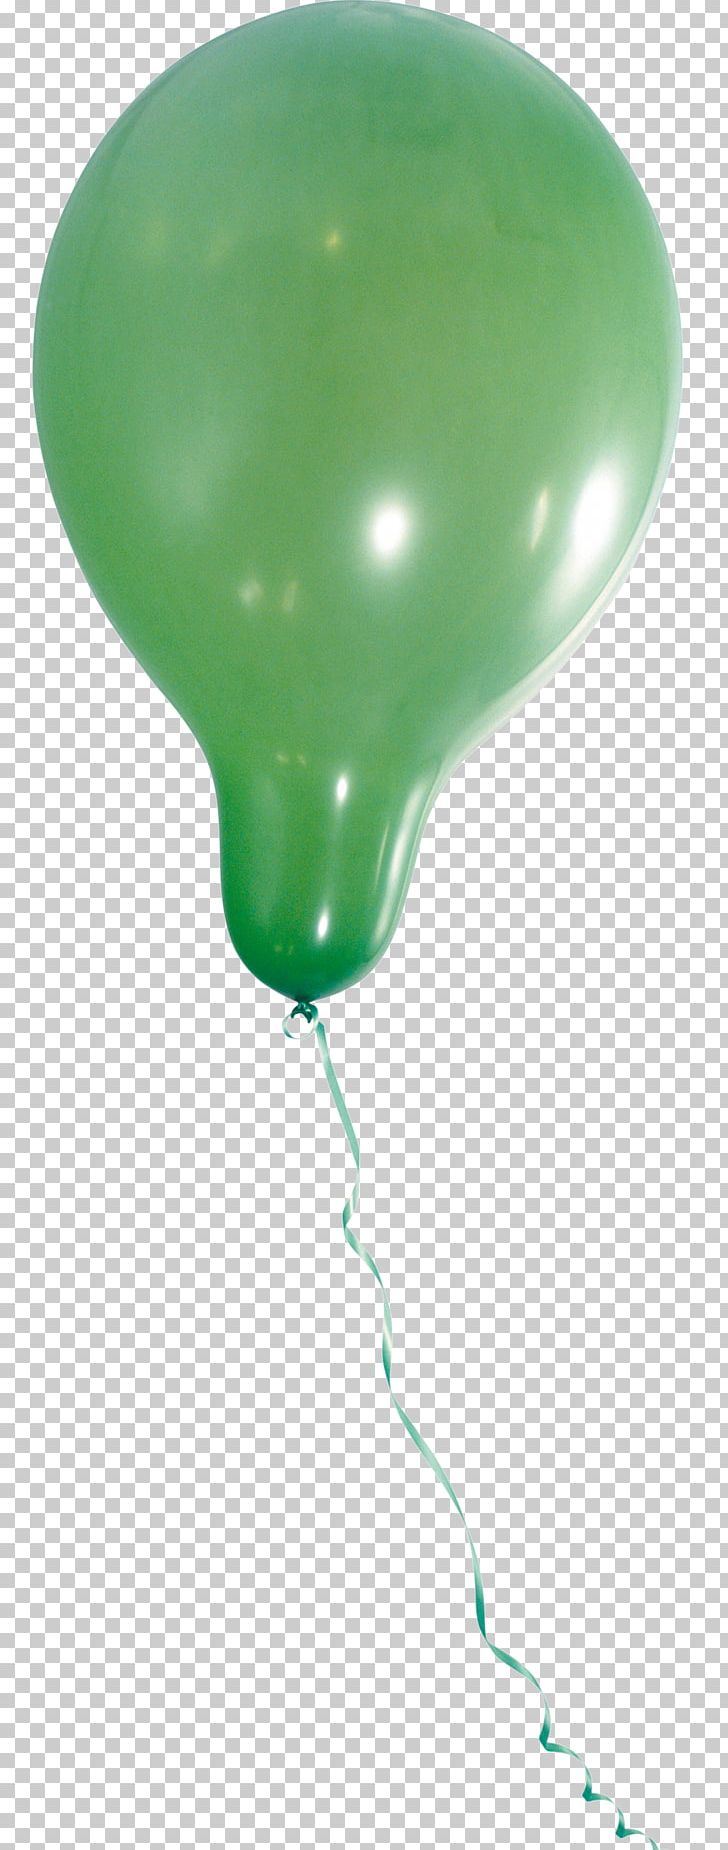 Toy Balloon PNG, Clipart, Balloon, Green, Objects, Party Supply, Toy Balloon Free PNG Download